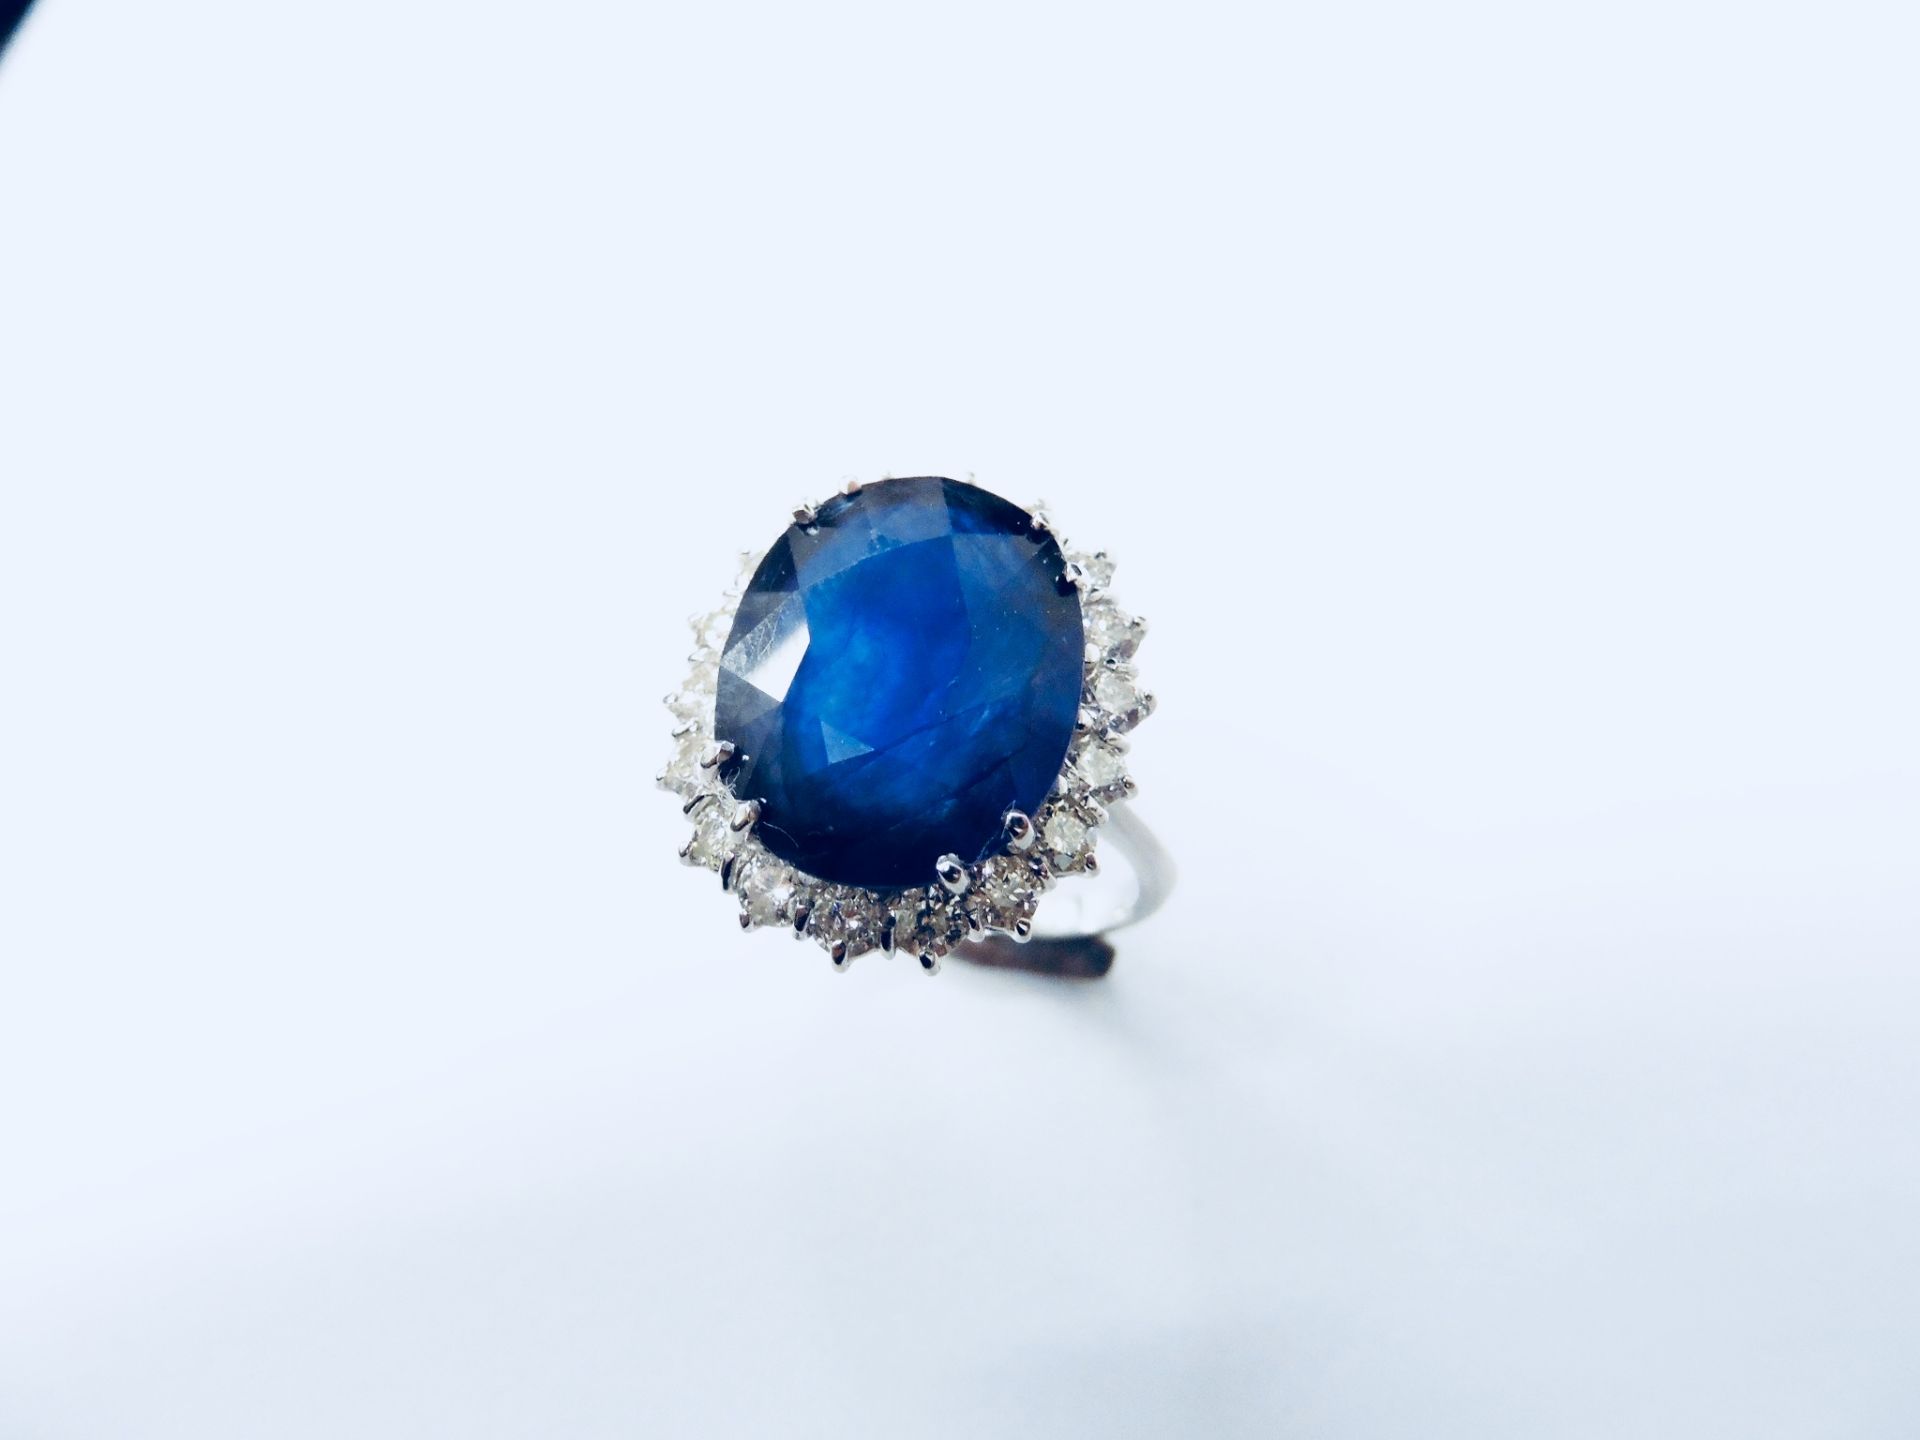 10ct sapphire and diamond cluster ring. Oval cut colour treated ( glass filled ) sapphire surrounded - Bild 3 aus 5